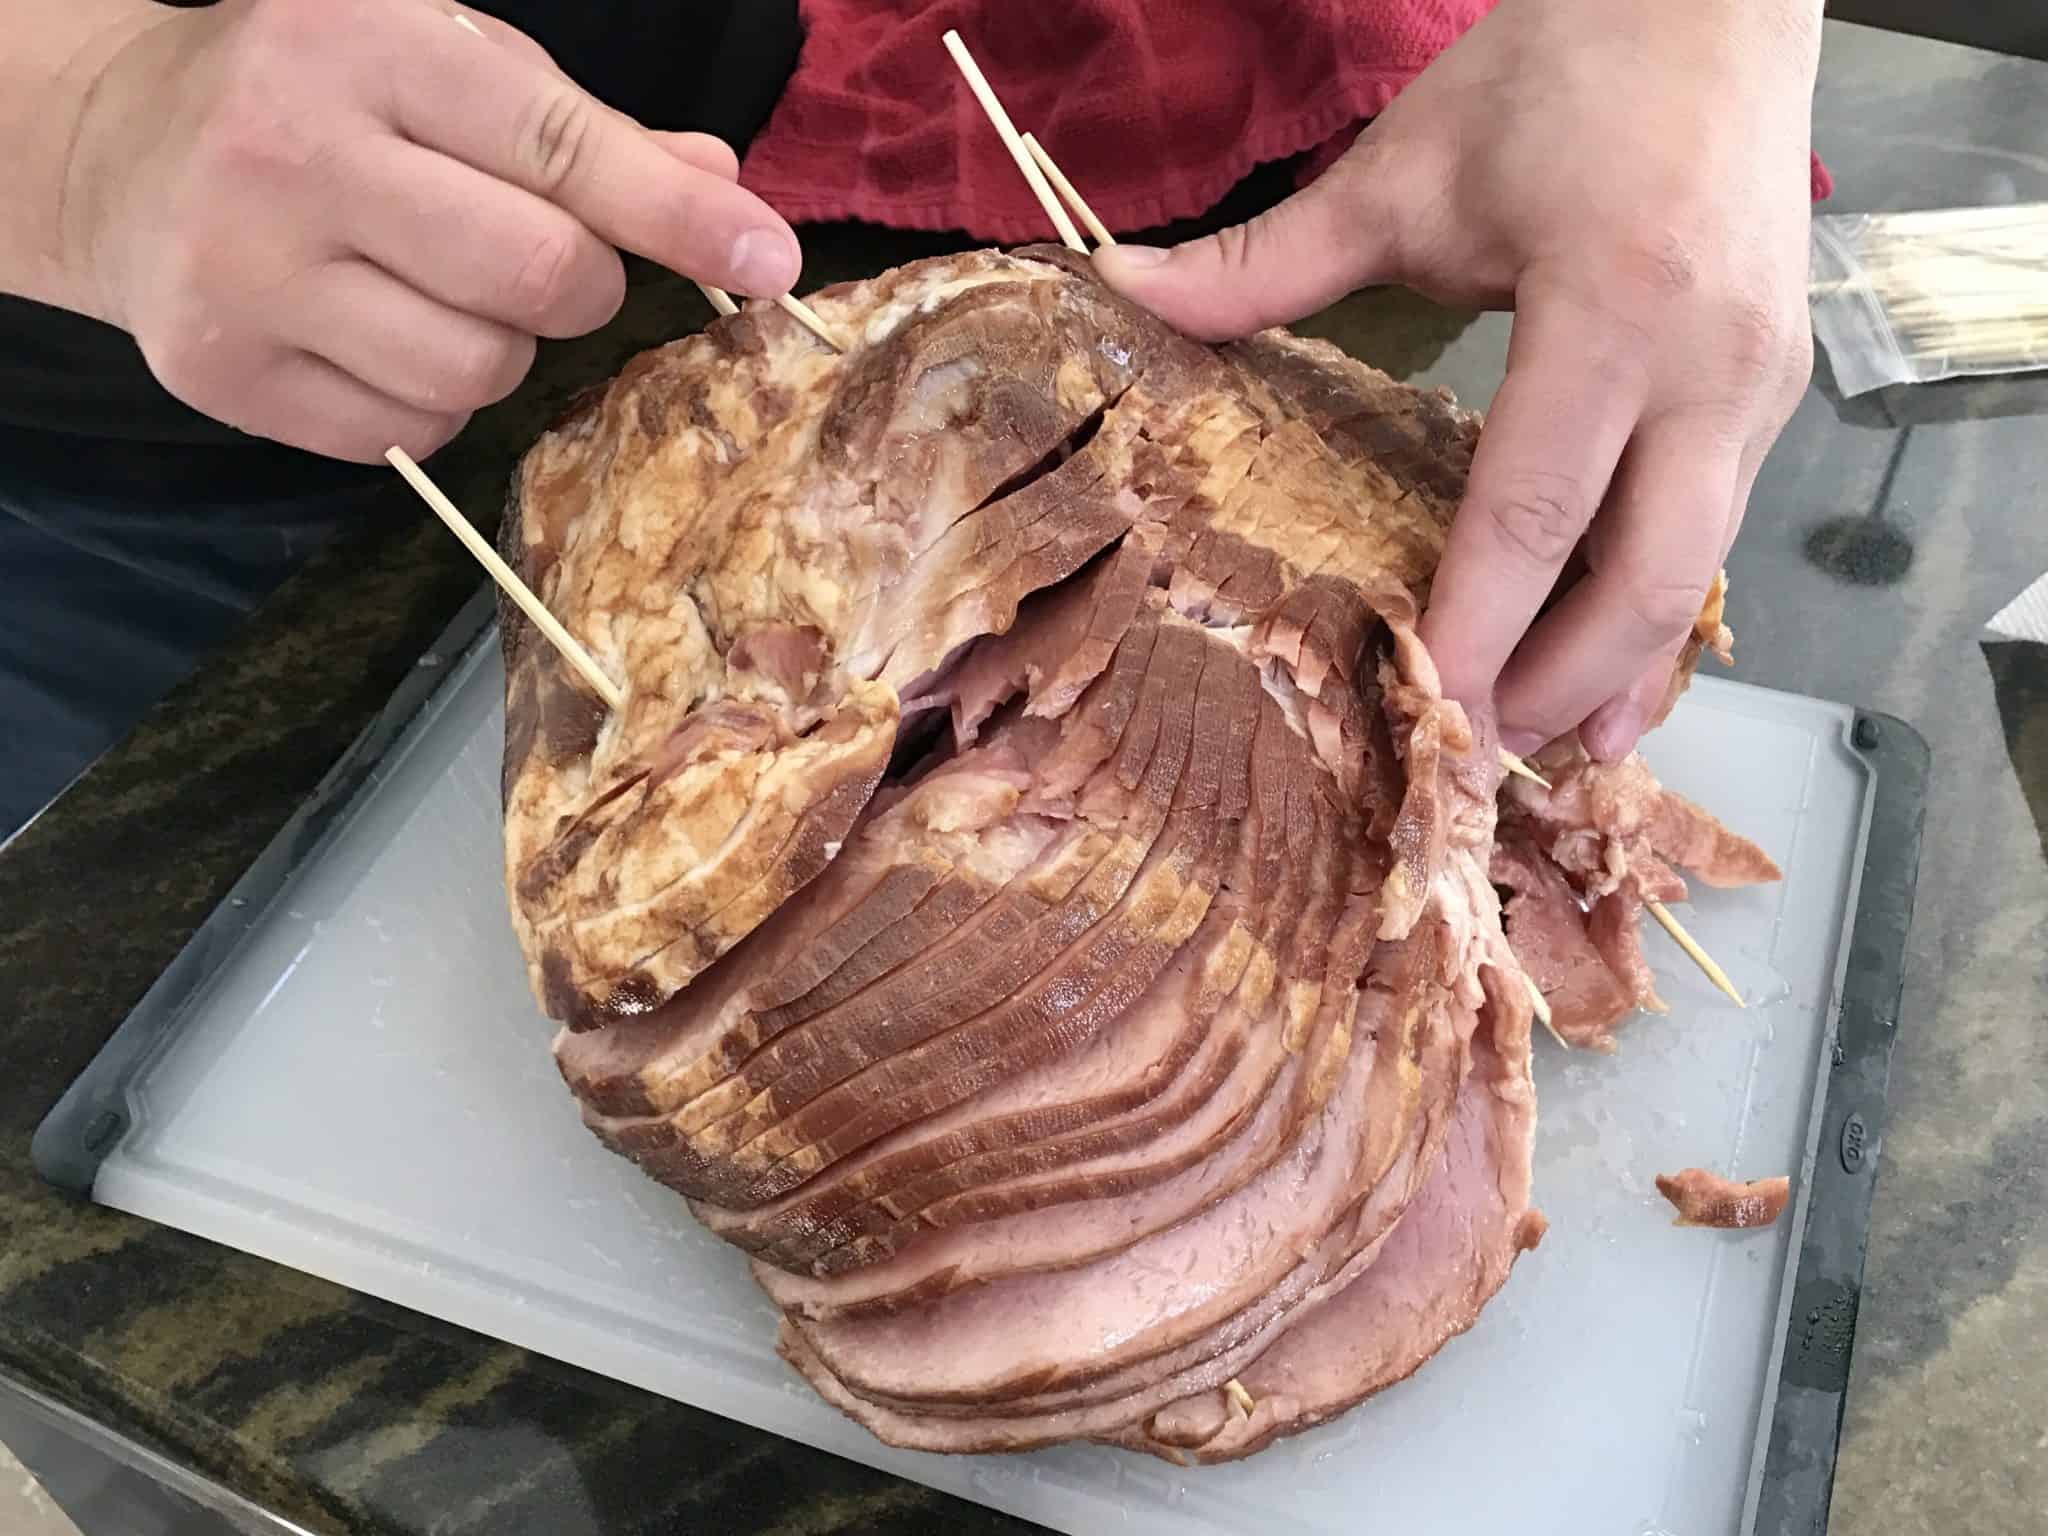 Sliced ham being held together with skewers on white cutting board